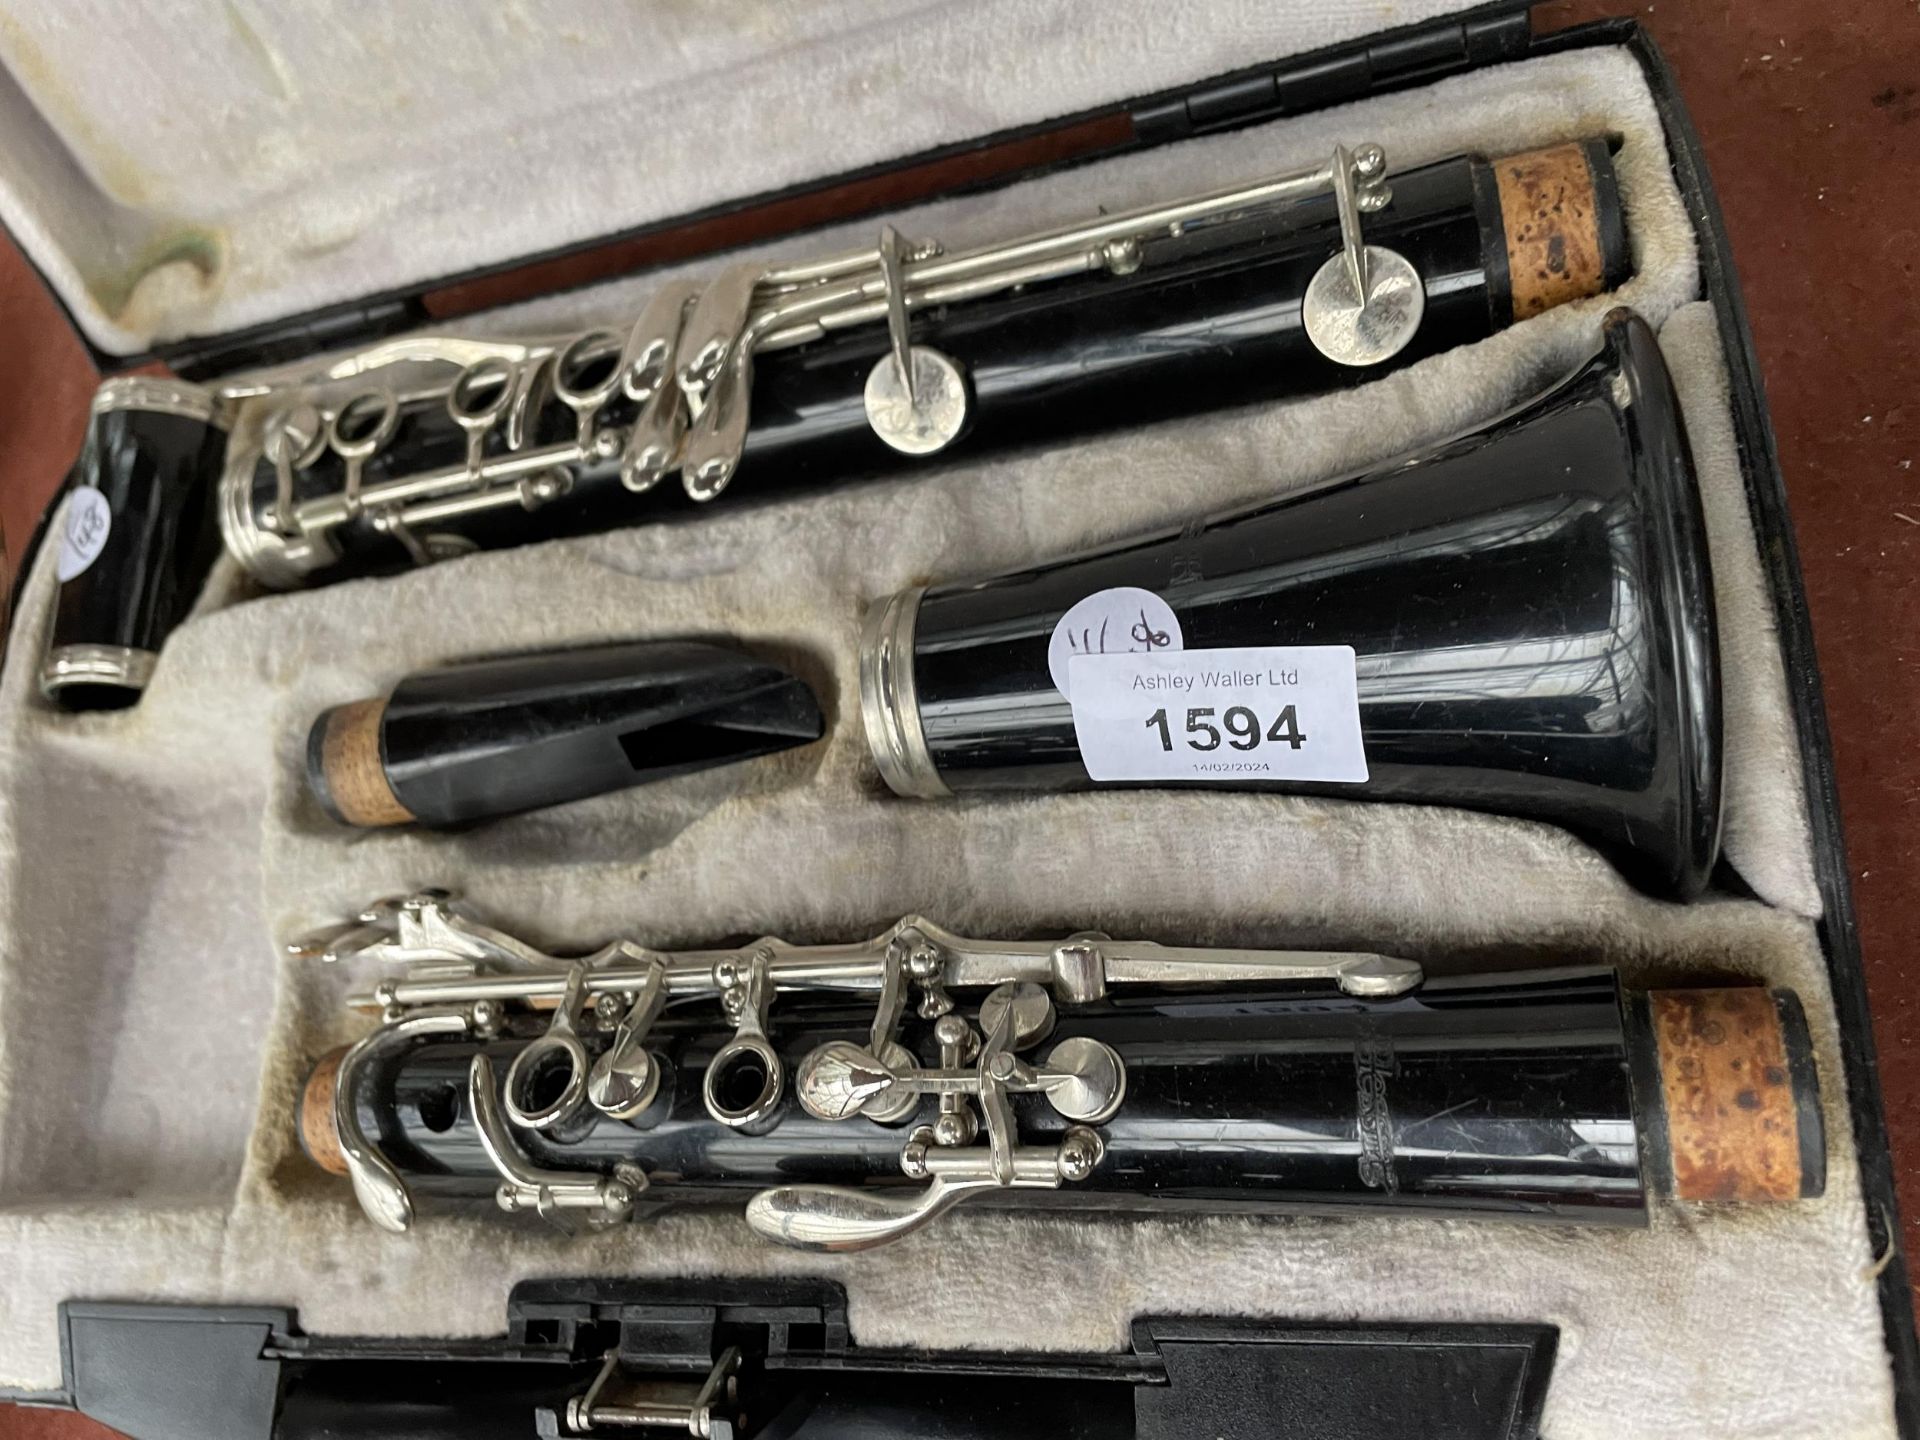 A CASED BLESSING CLARINET - Image 2 of 3